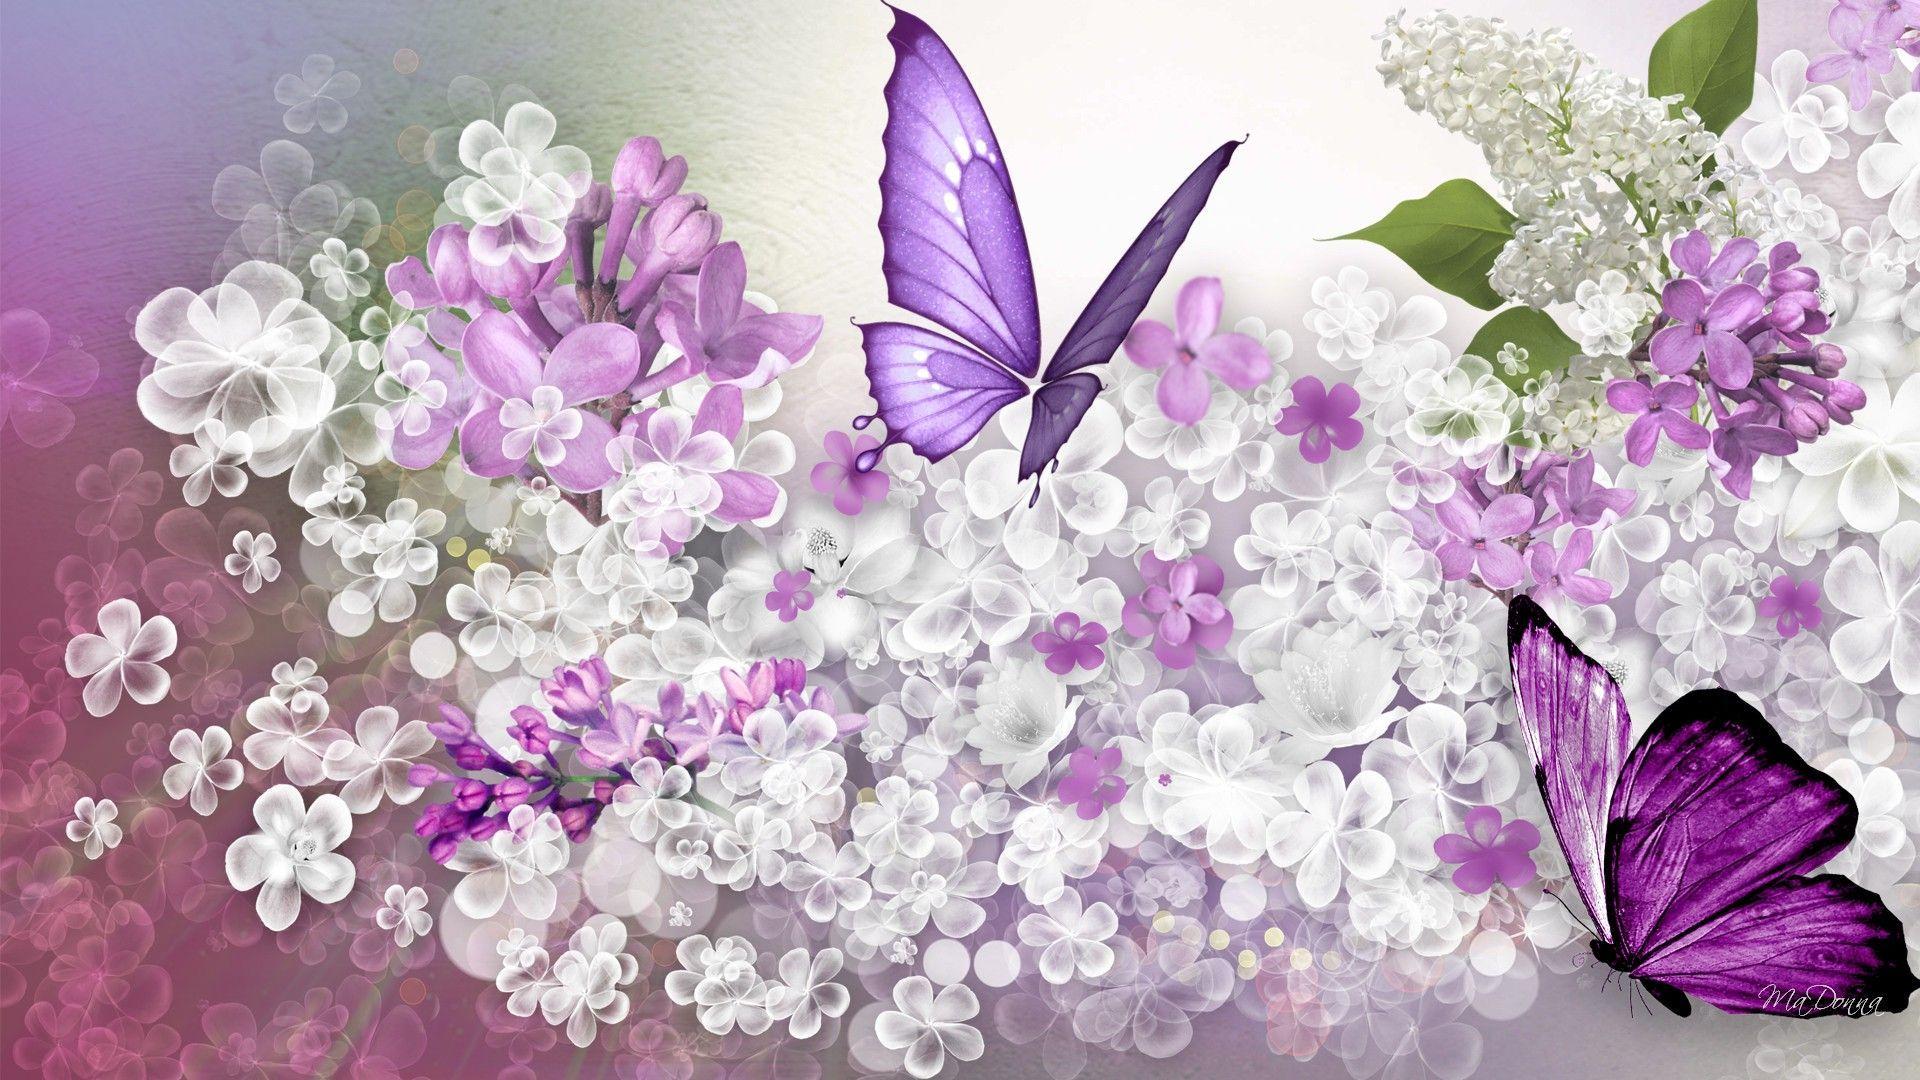 Lilac Flowers Windows 8.1 Theme and Picture. Windows 8.1 Themes